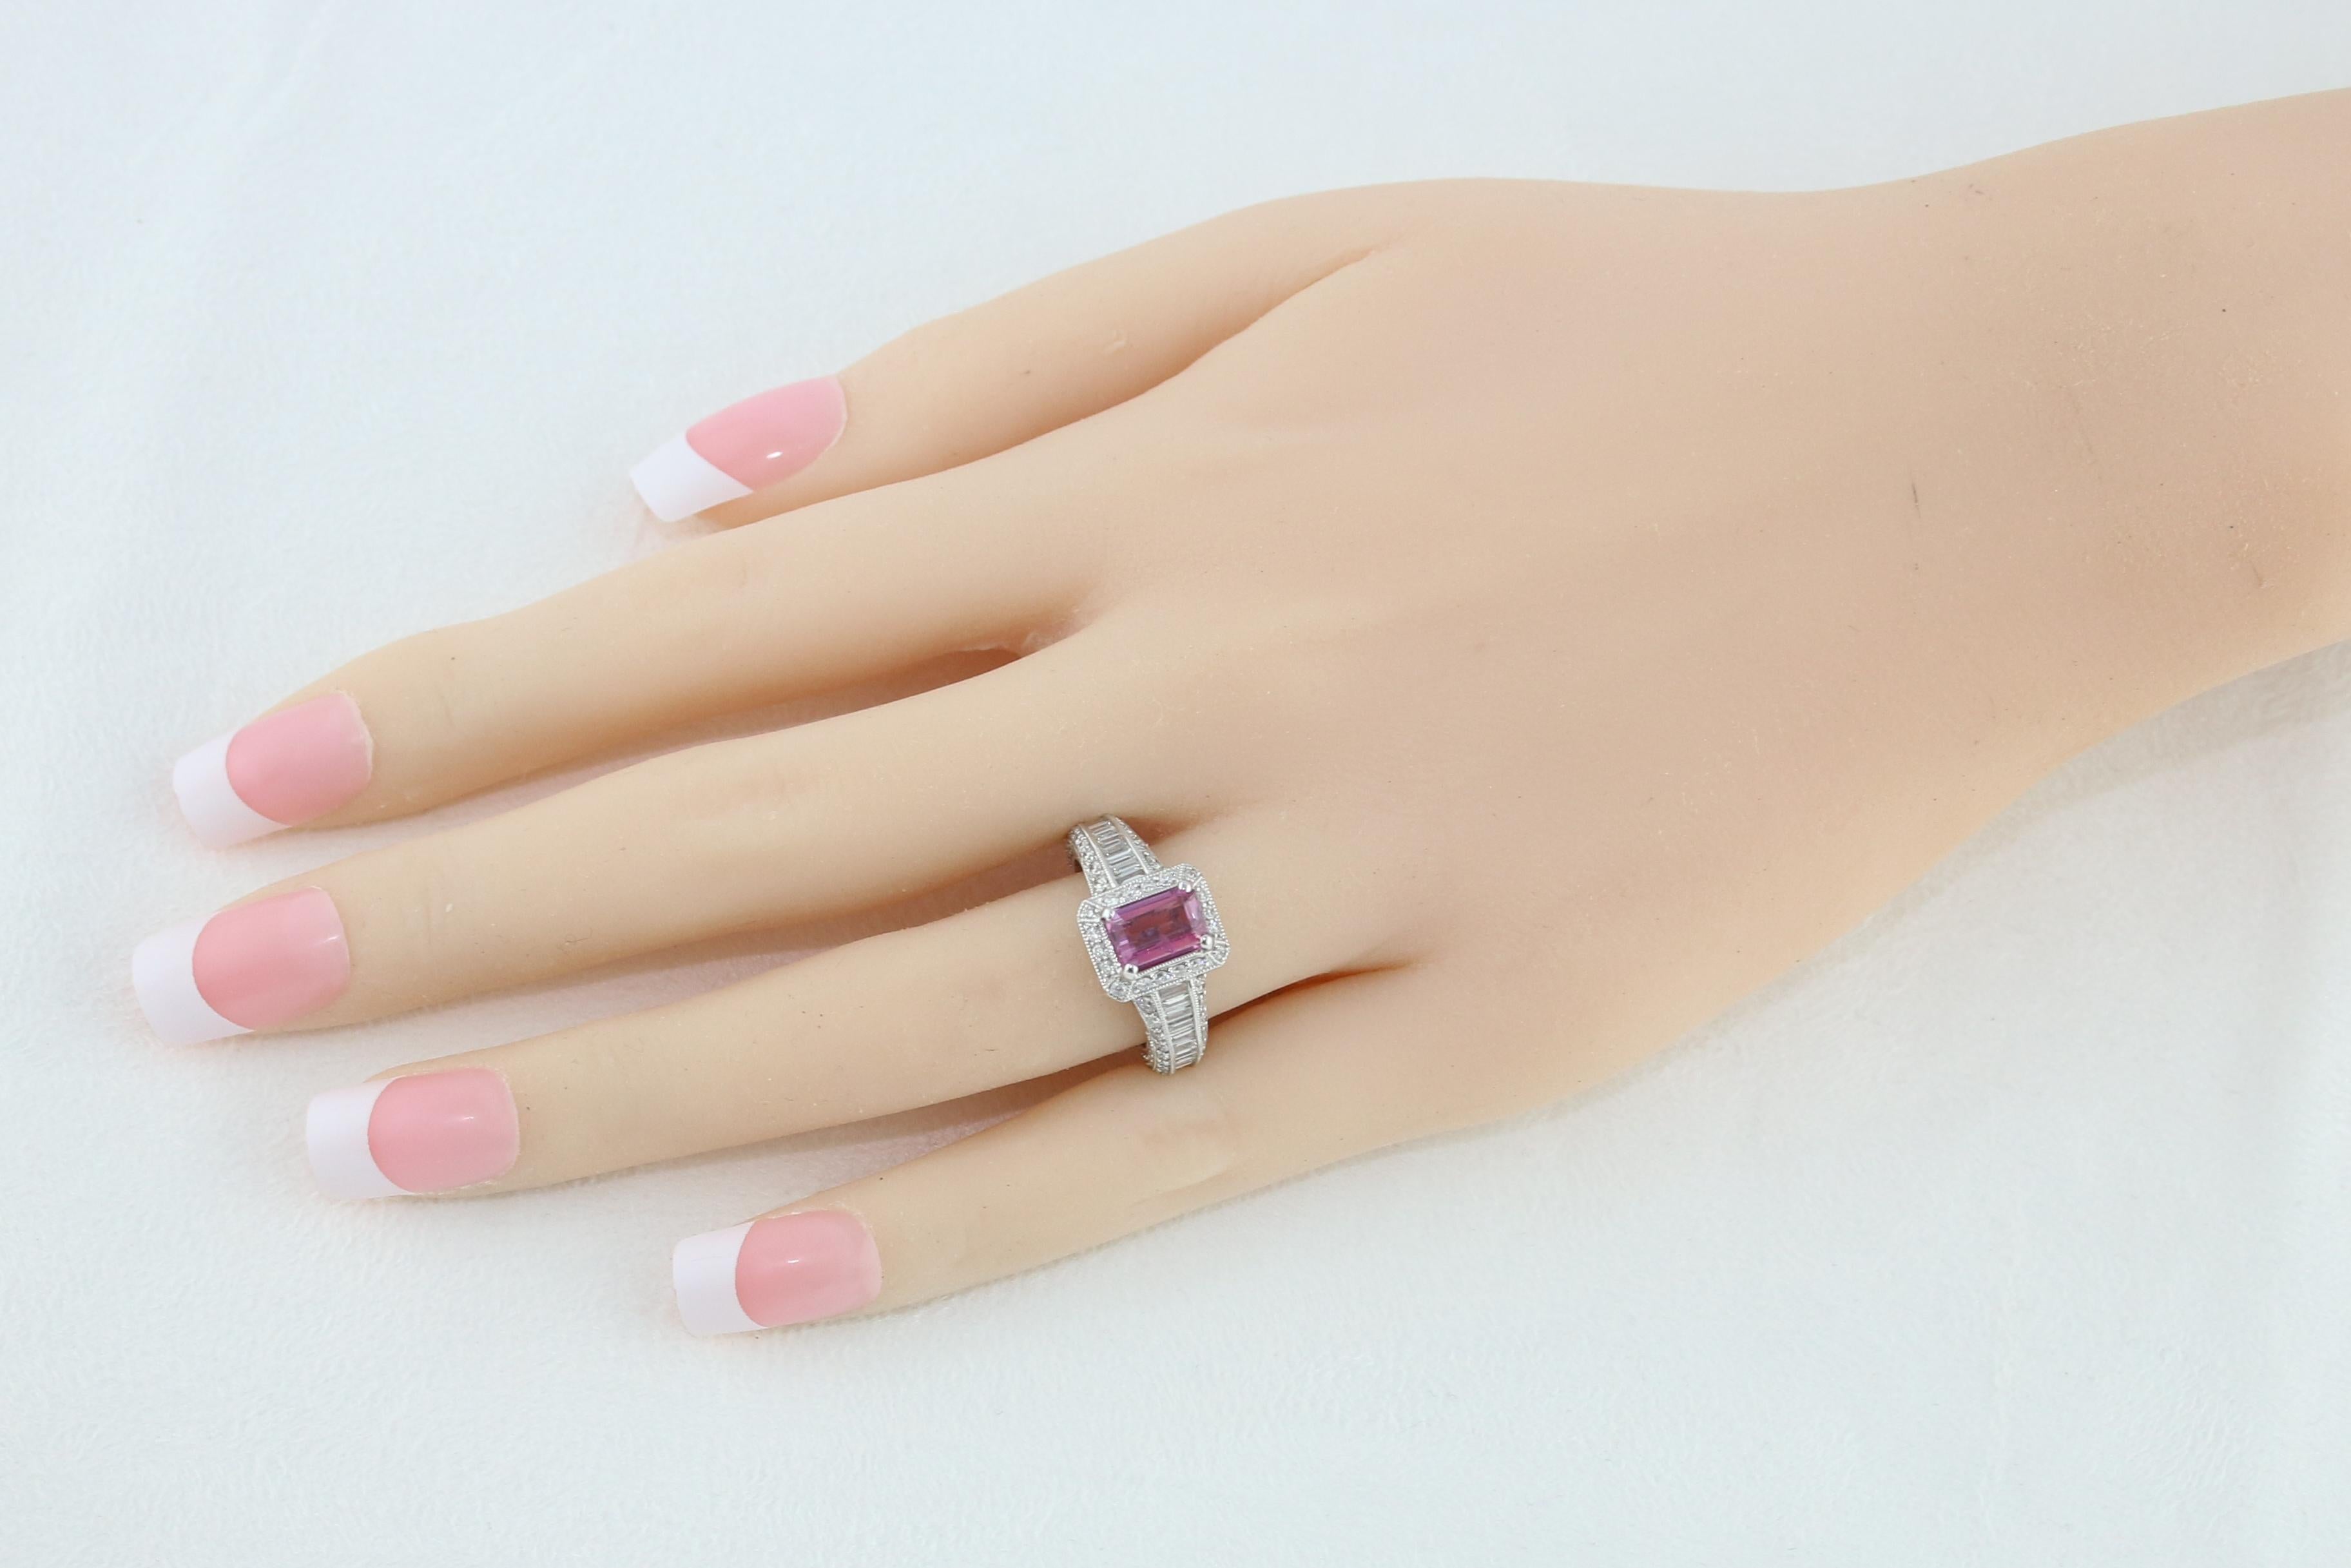 Certified No Heat 1.55 Carat Step Cut Pink Sapphire Diamond Gold Milgrain Ring In New Condition For Sale In New York, NY